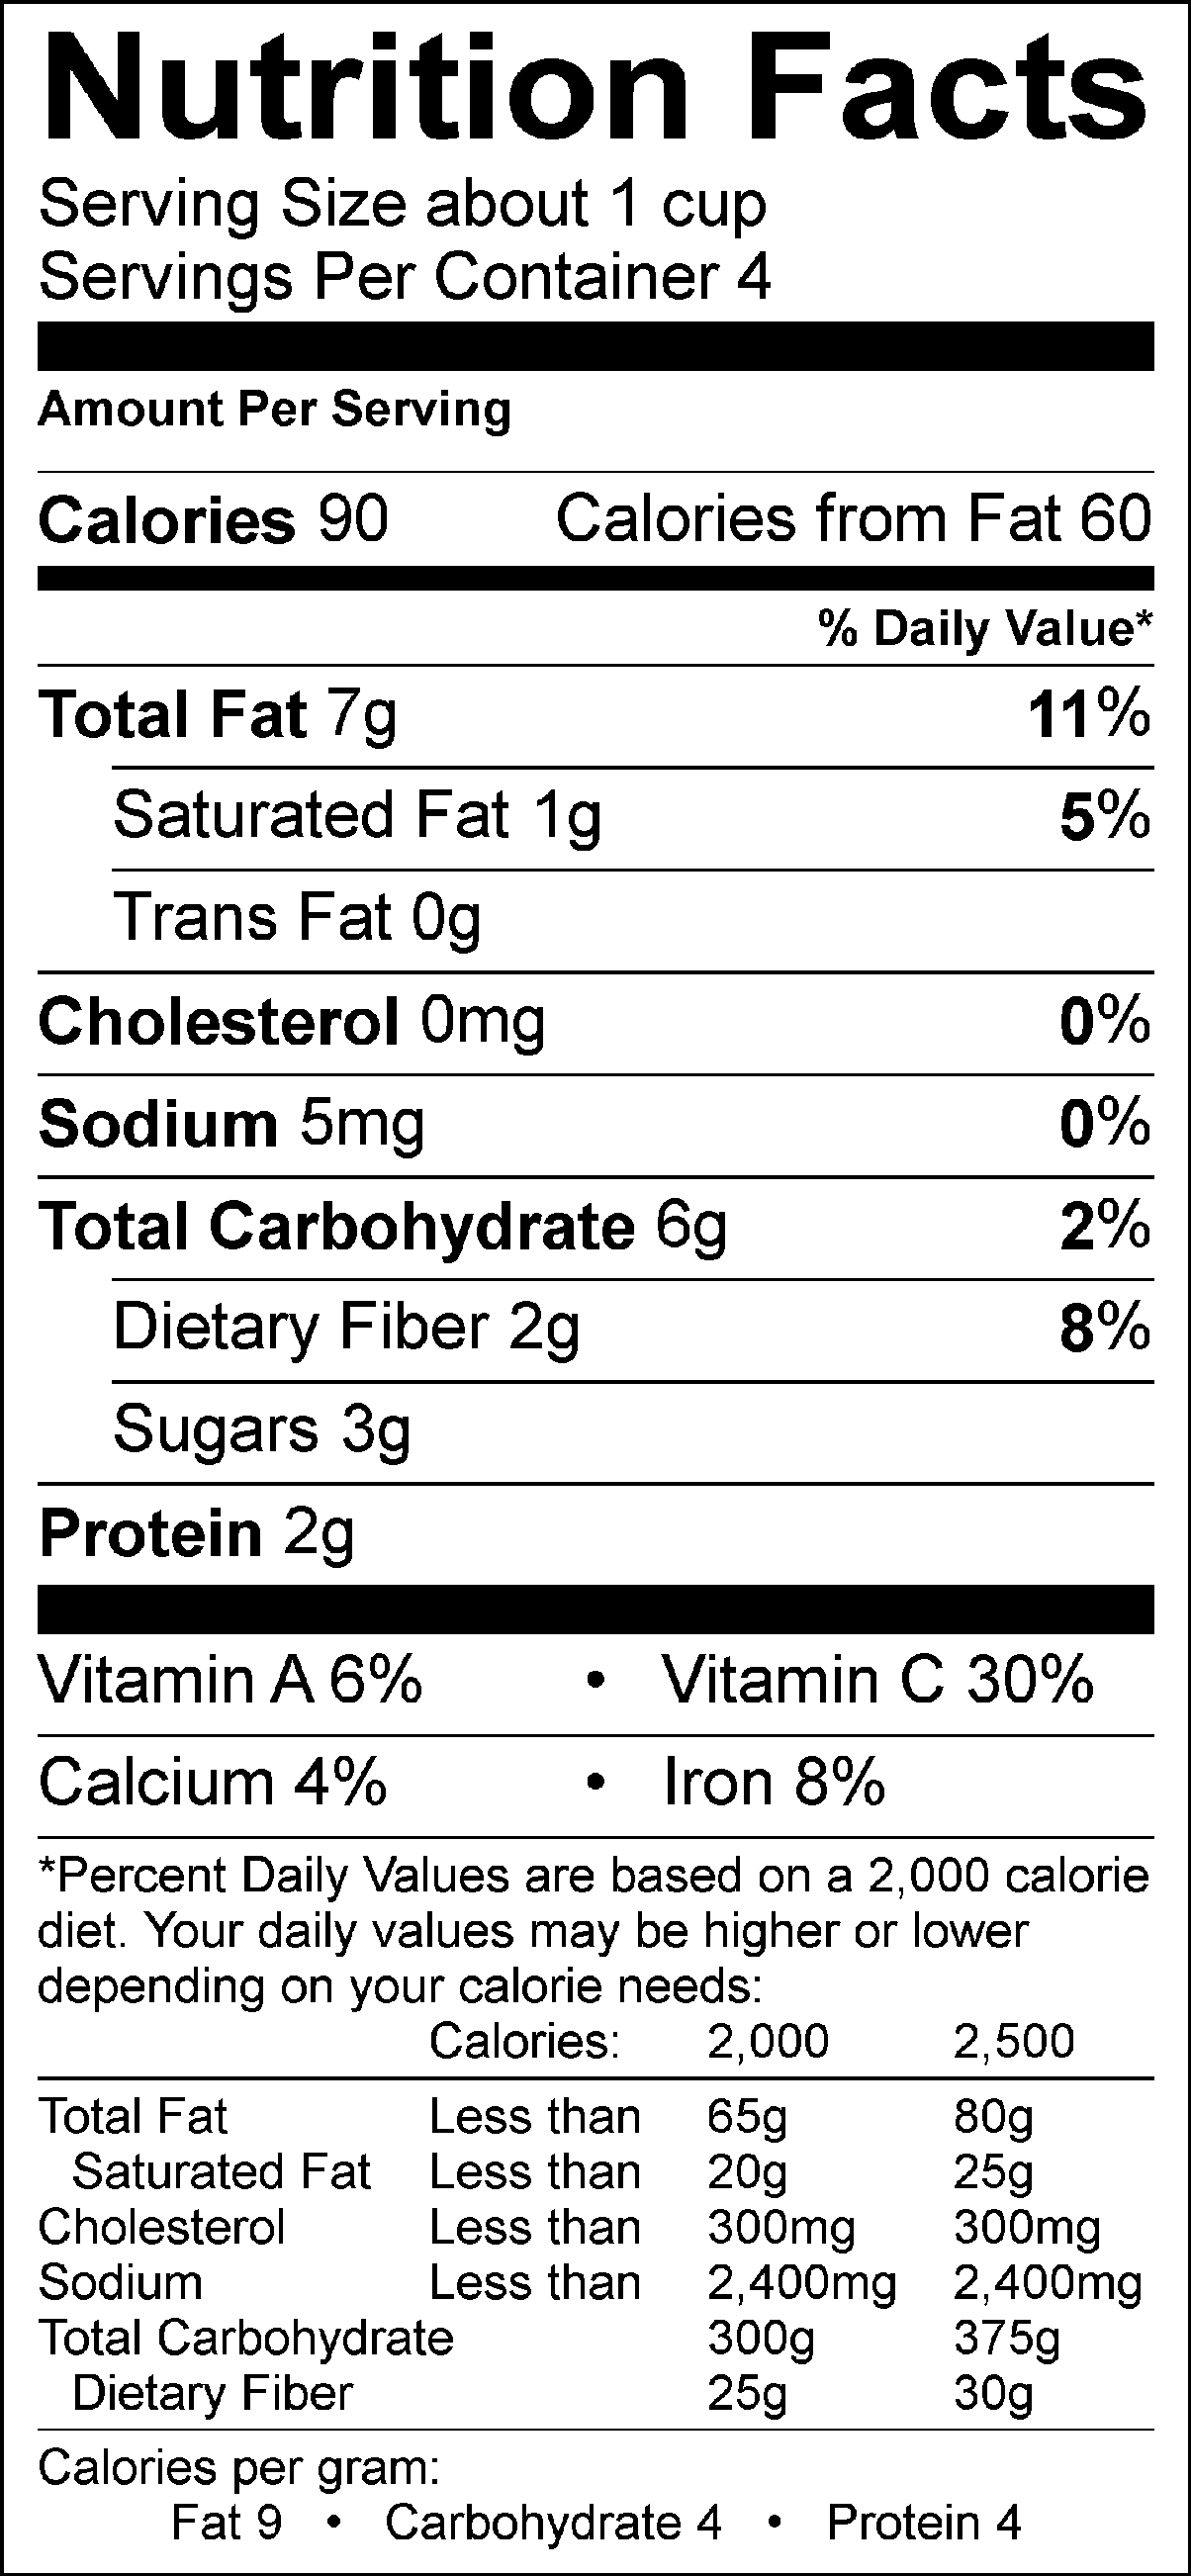 Nutrition Facts Label for Snow Peas with Tomatoes